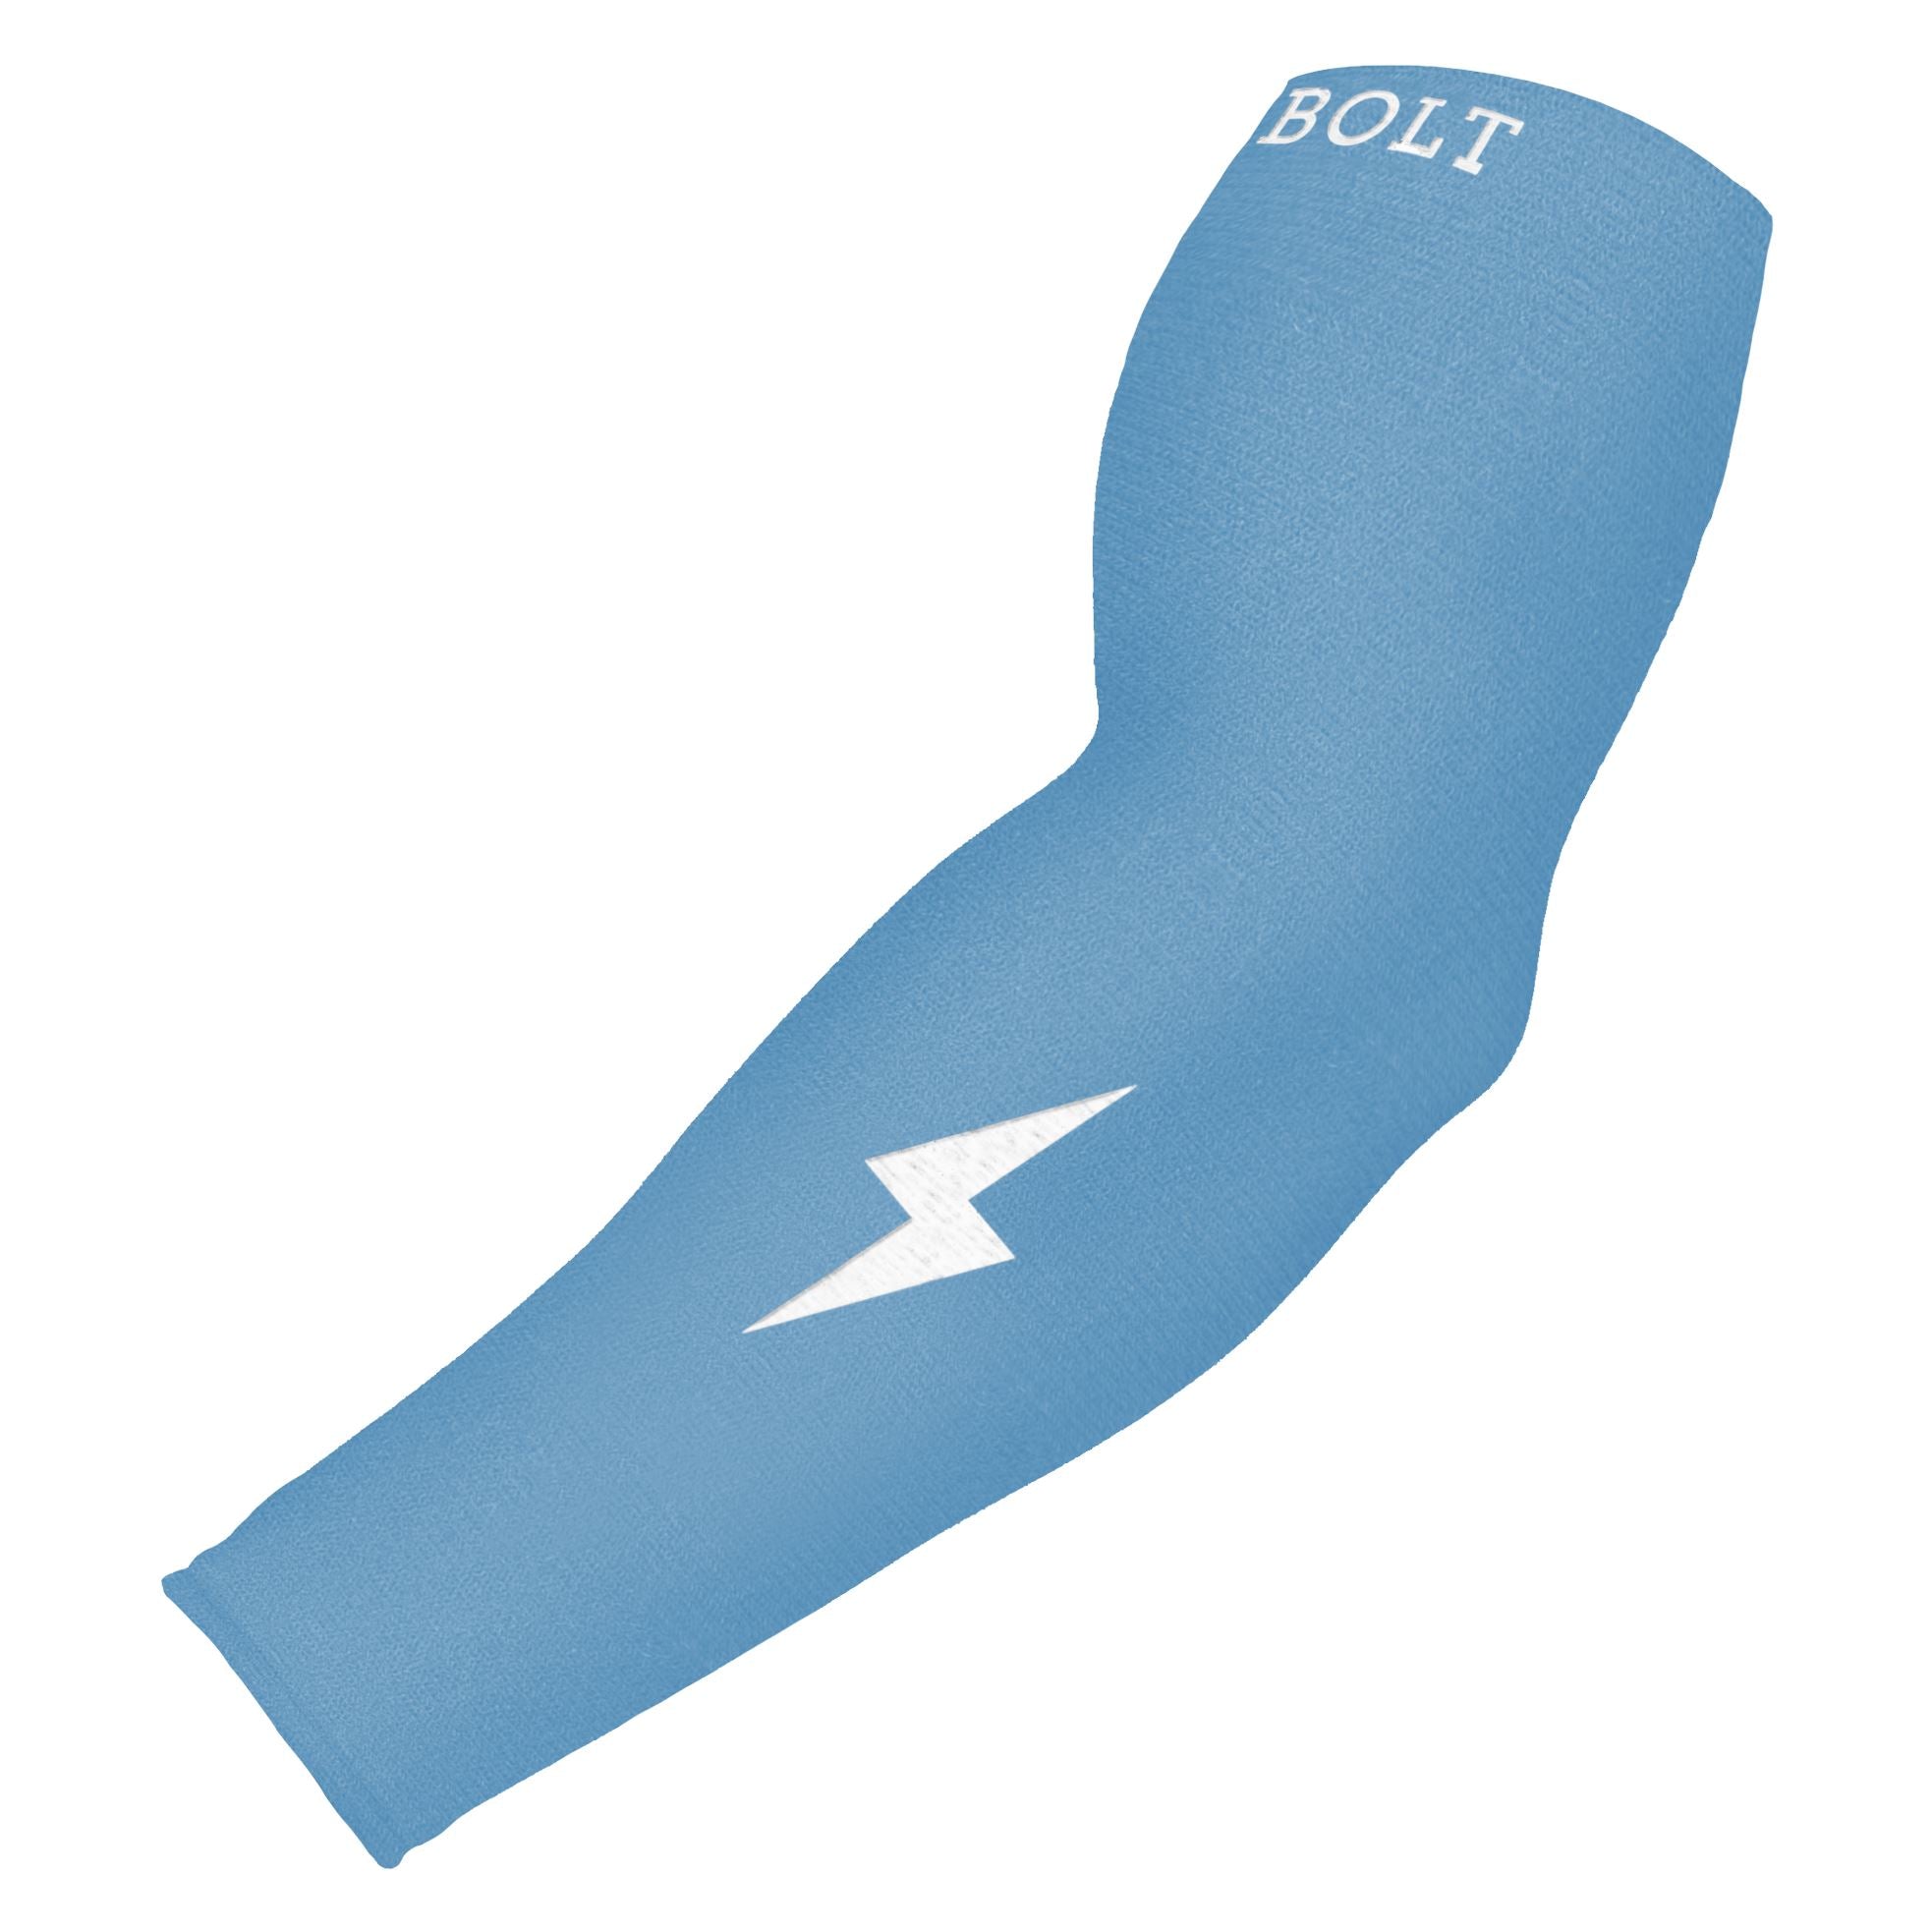 Image of BRUCE BOLT Graduated Compression Premium Arm Sleeve - BABY BLUE